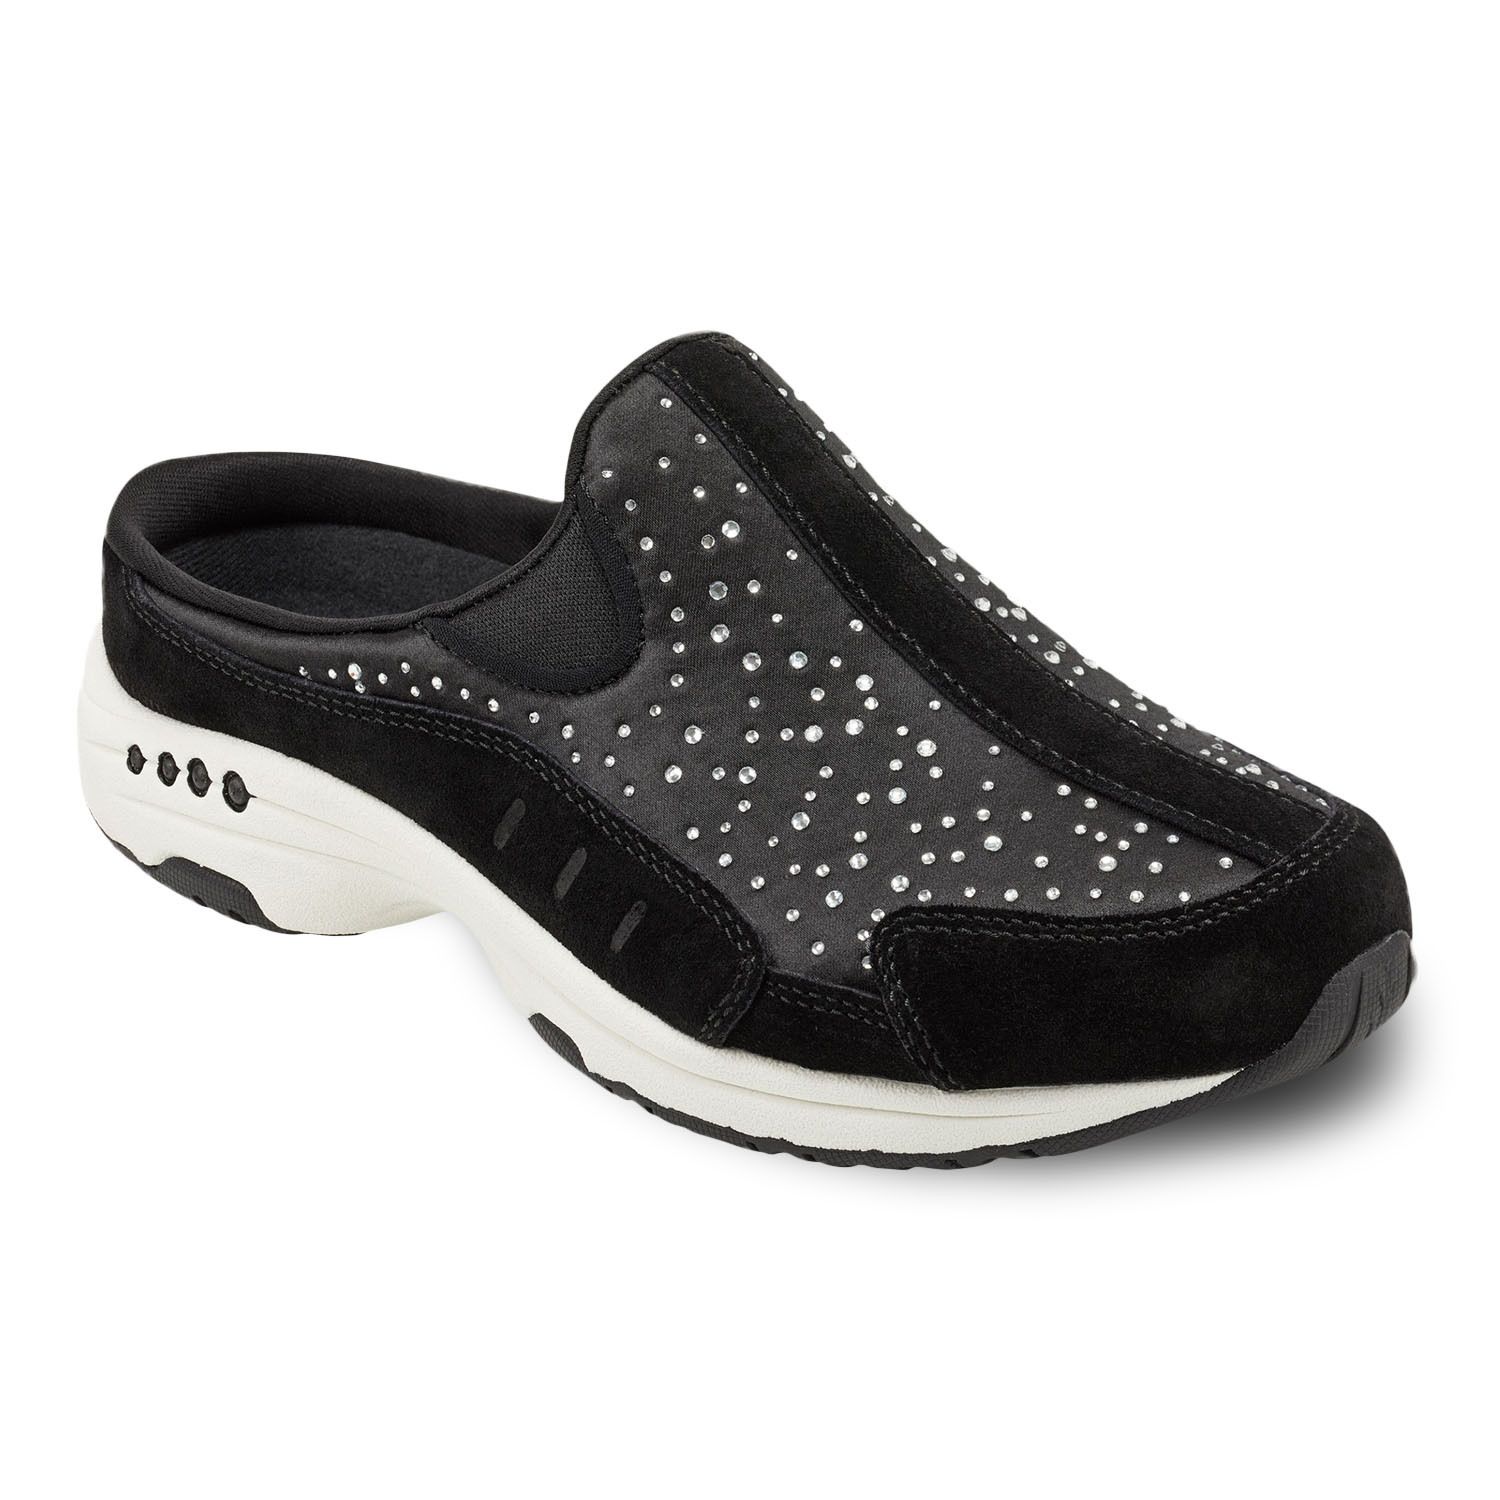 Image for Easy Spirit Travelstone Women's Jeweled Mules at Kohl's.